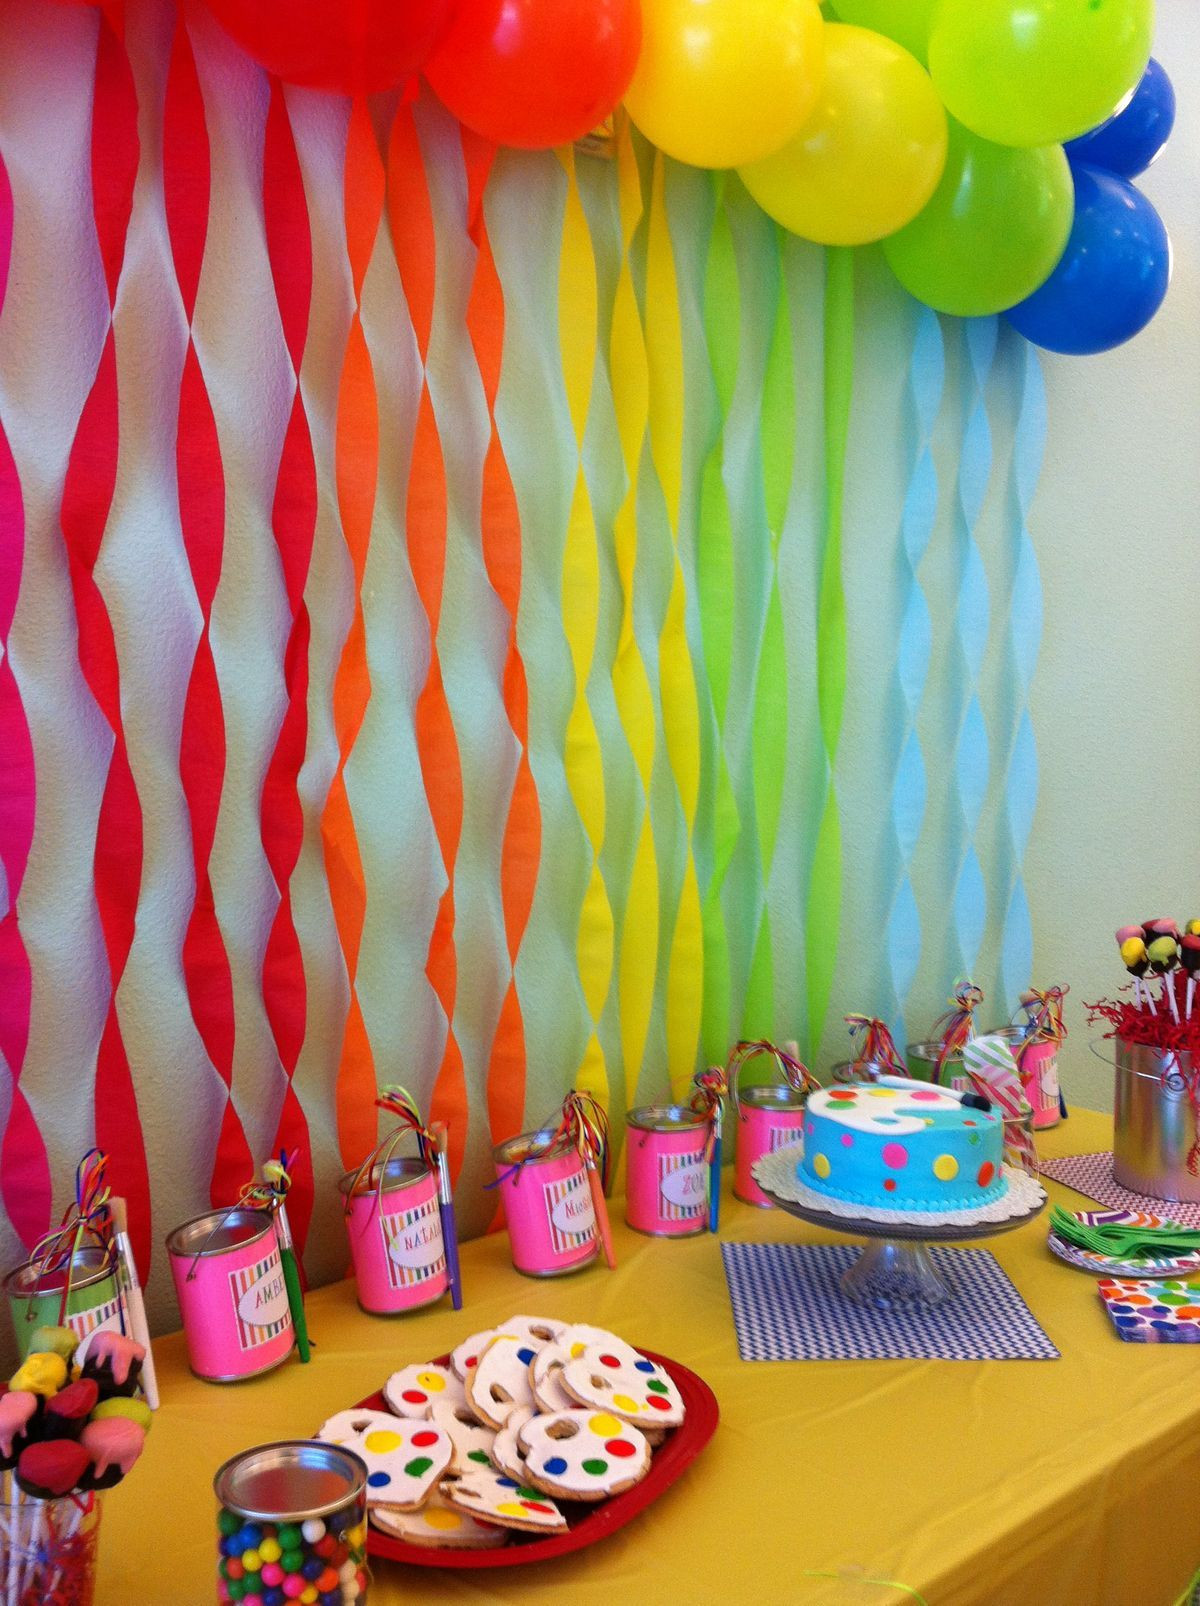 12 Year Old Boy Birthday Party Ideas At Home
 So Perf Birthday Party for an 8 year old girl Rocker